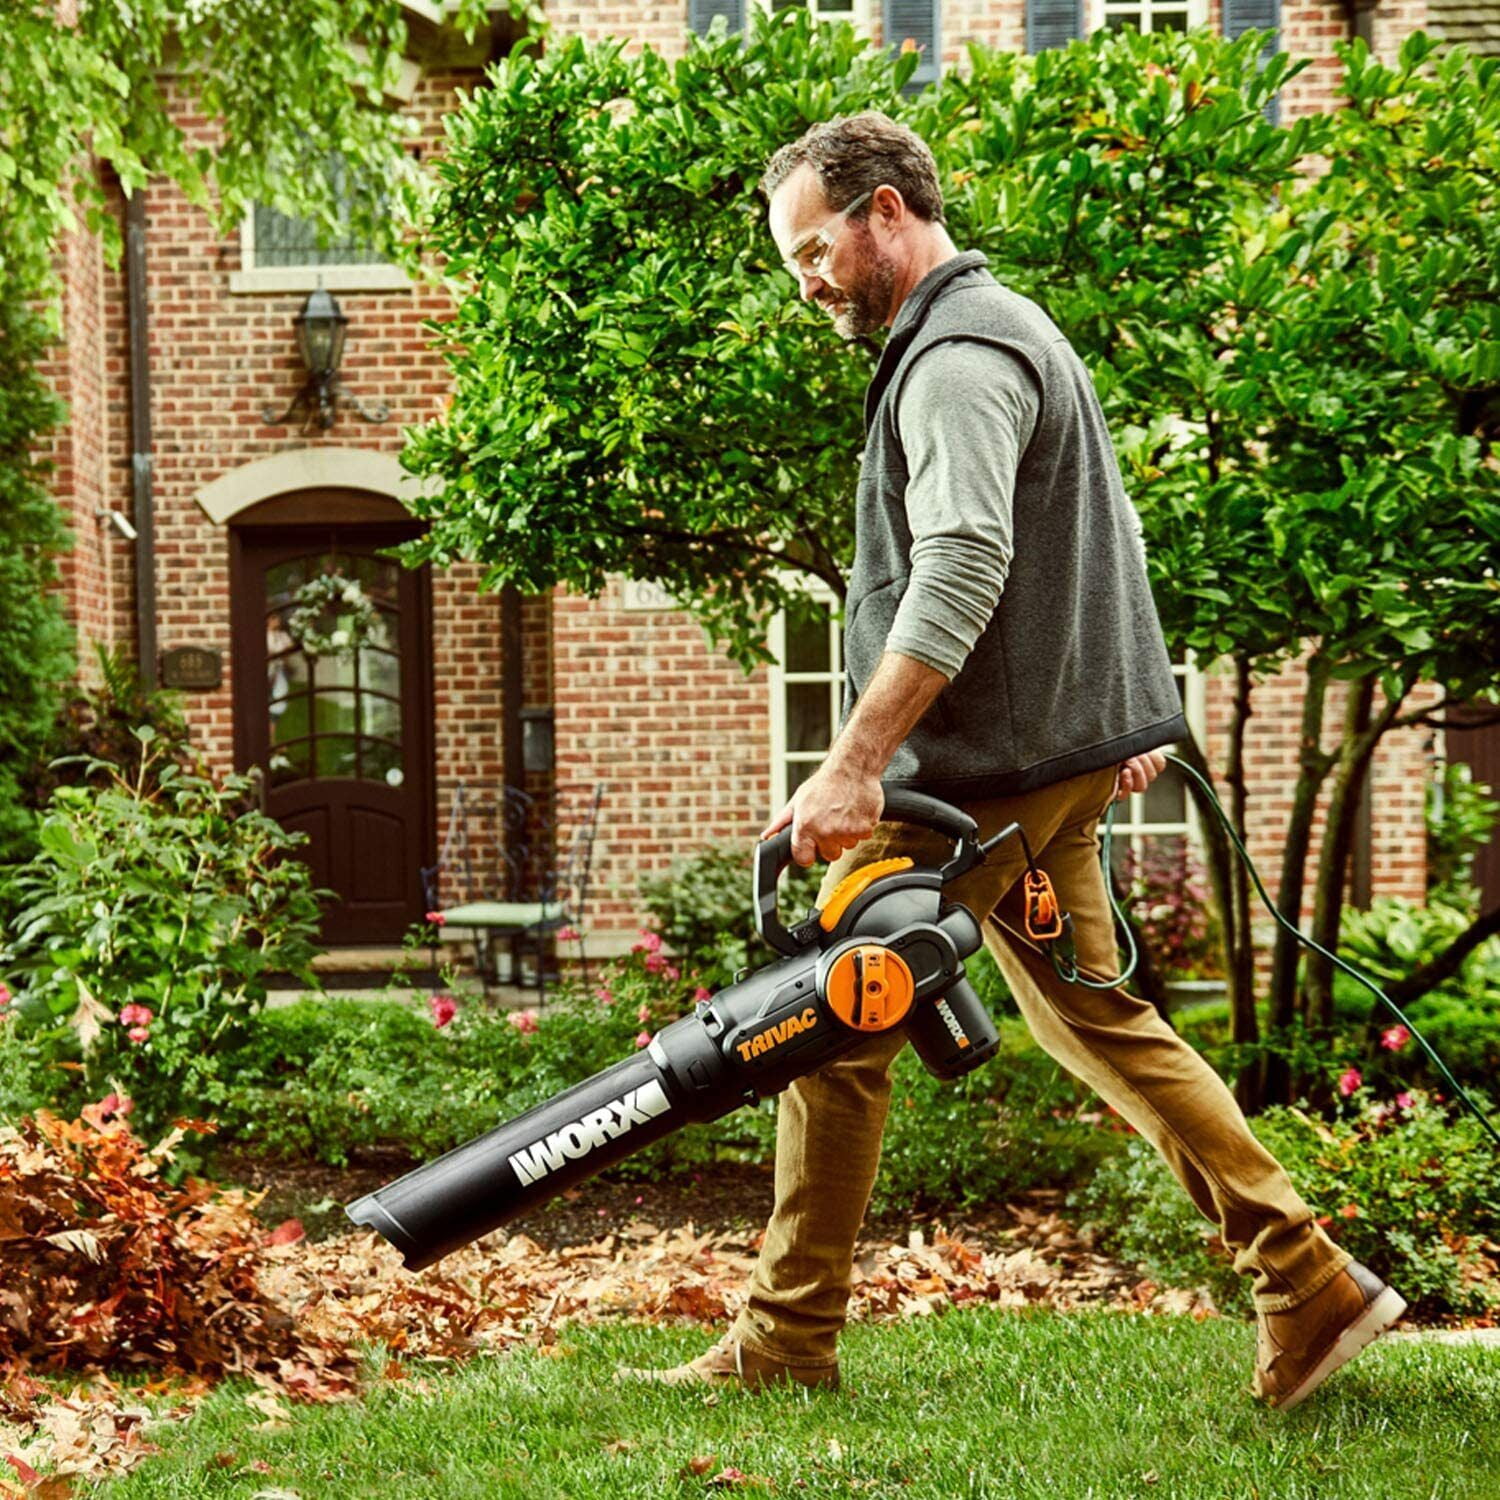 Worx WG524 12 Amp TRIVAC 3-in-1 Electric Leaf Blower/Mulcher/Vac with Leaf  Collection System 